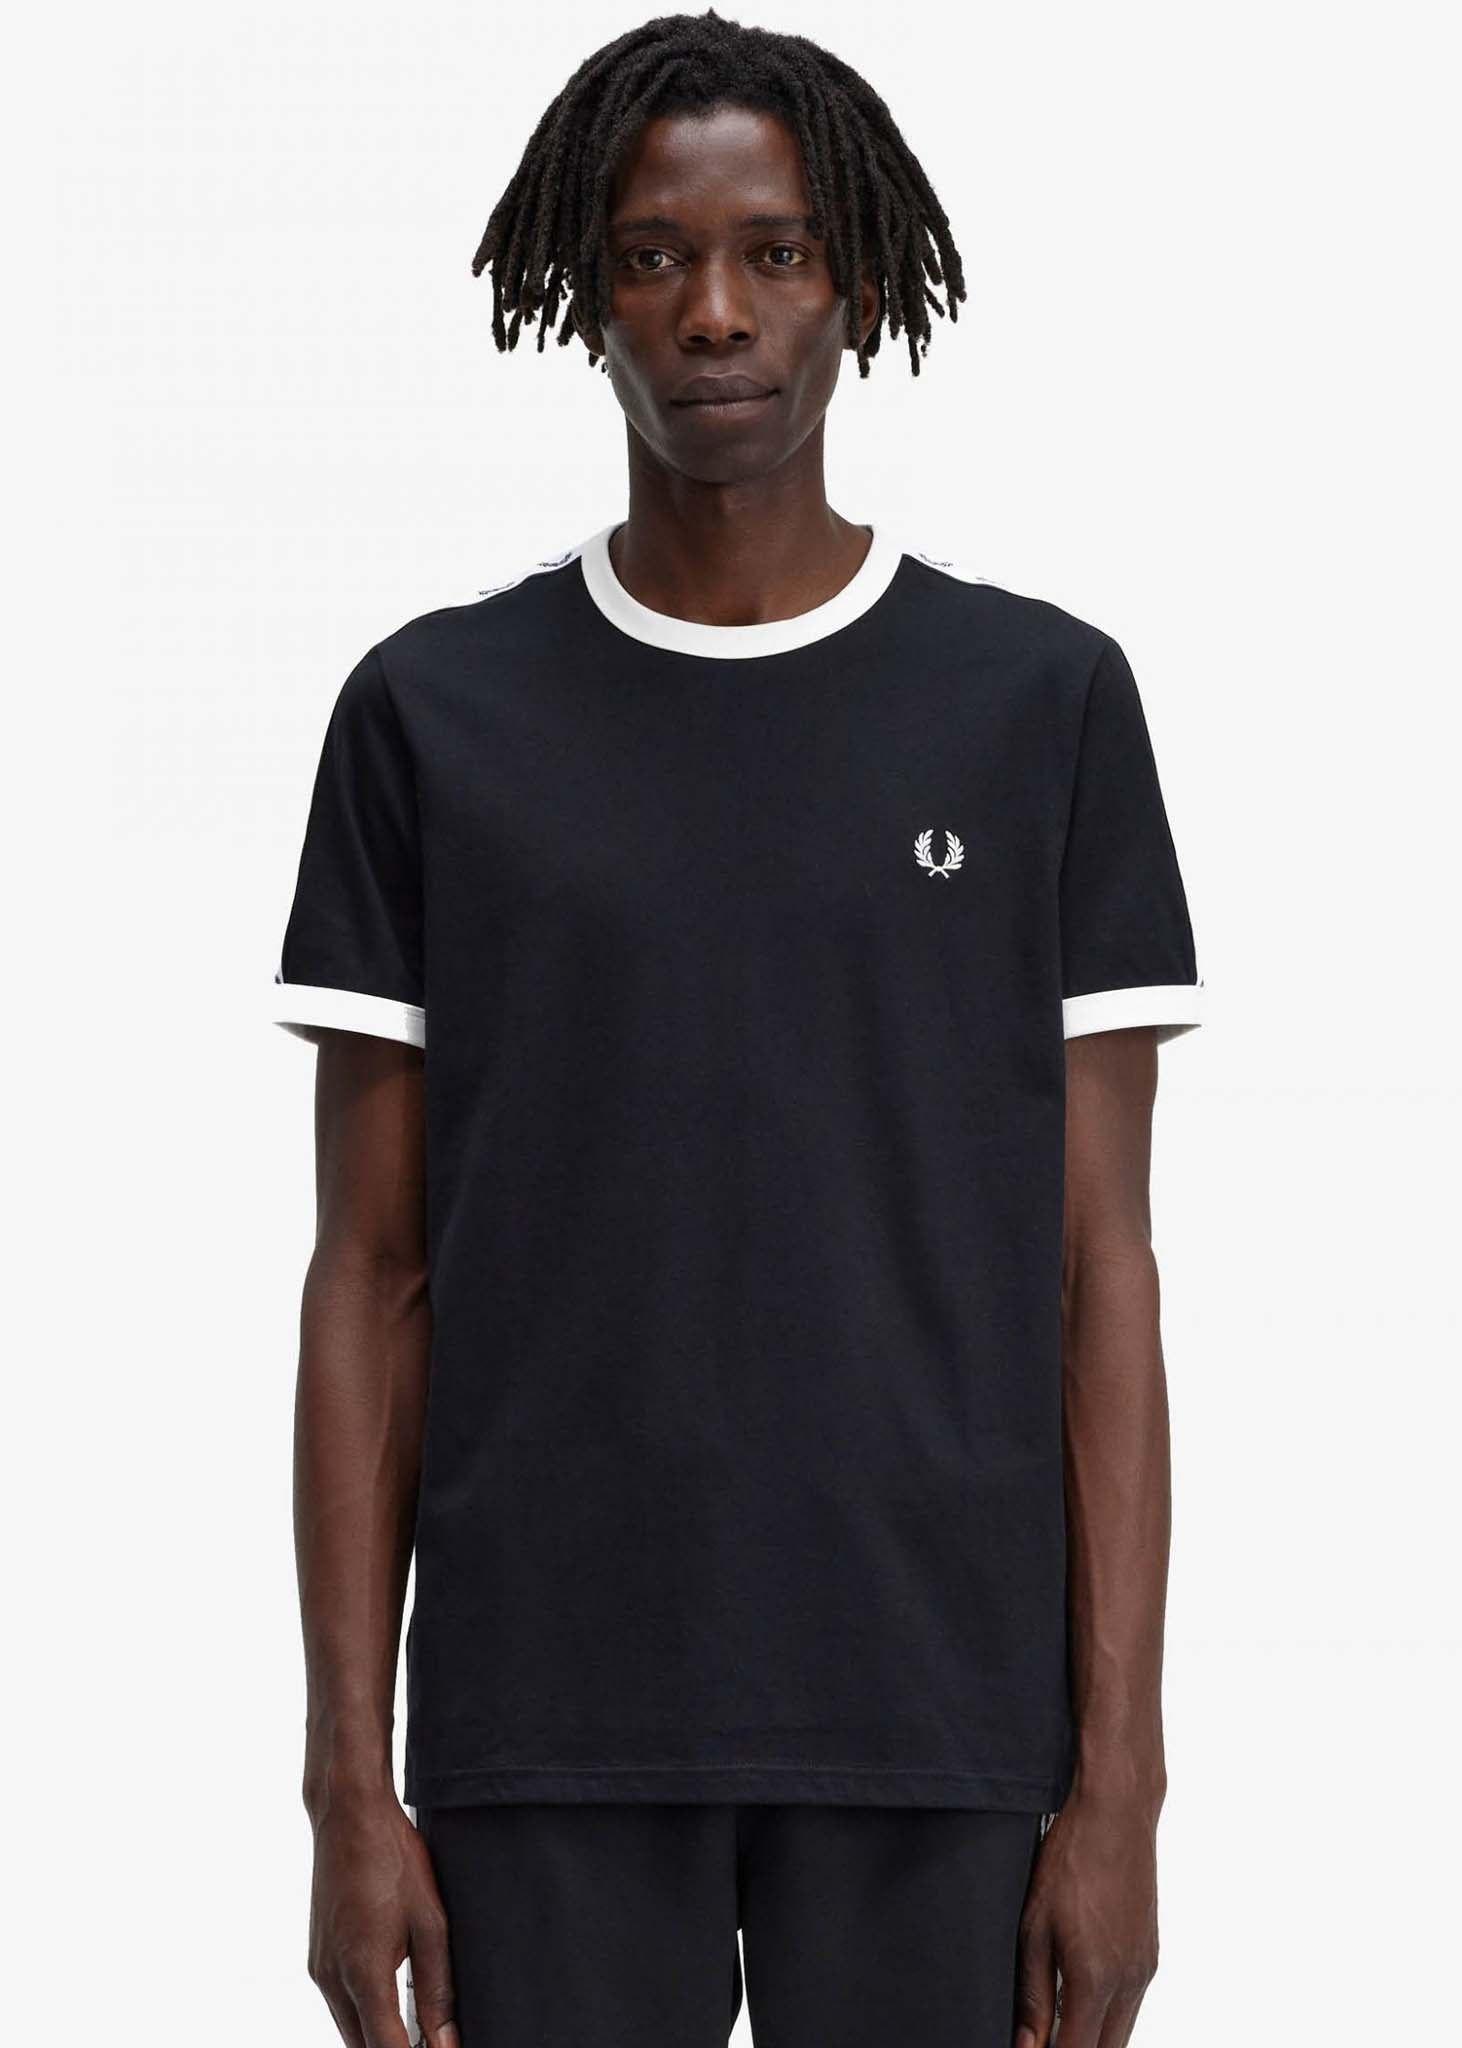 Fred Perry t-shirt black